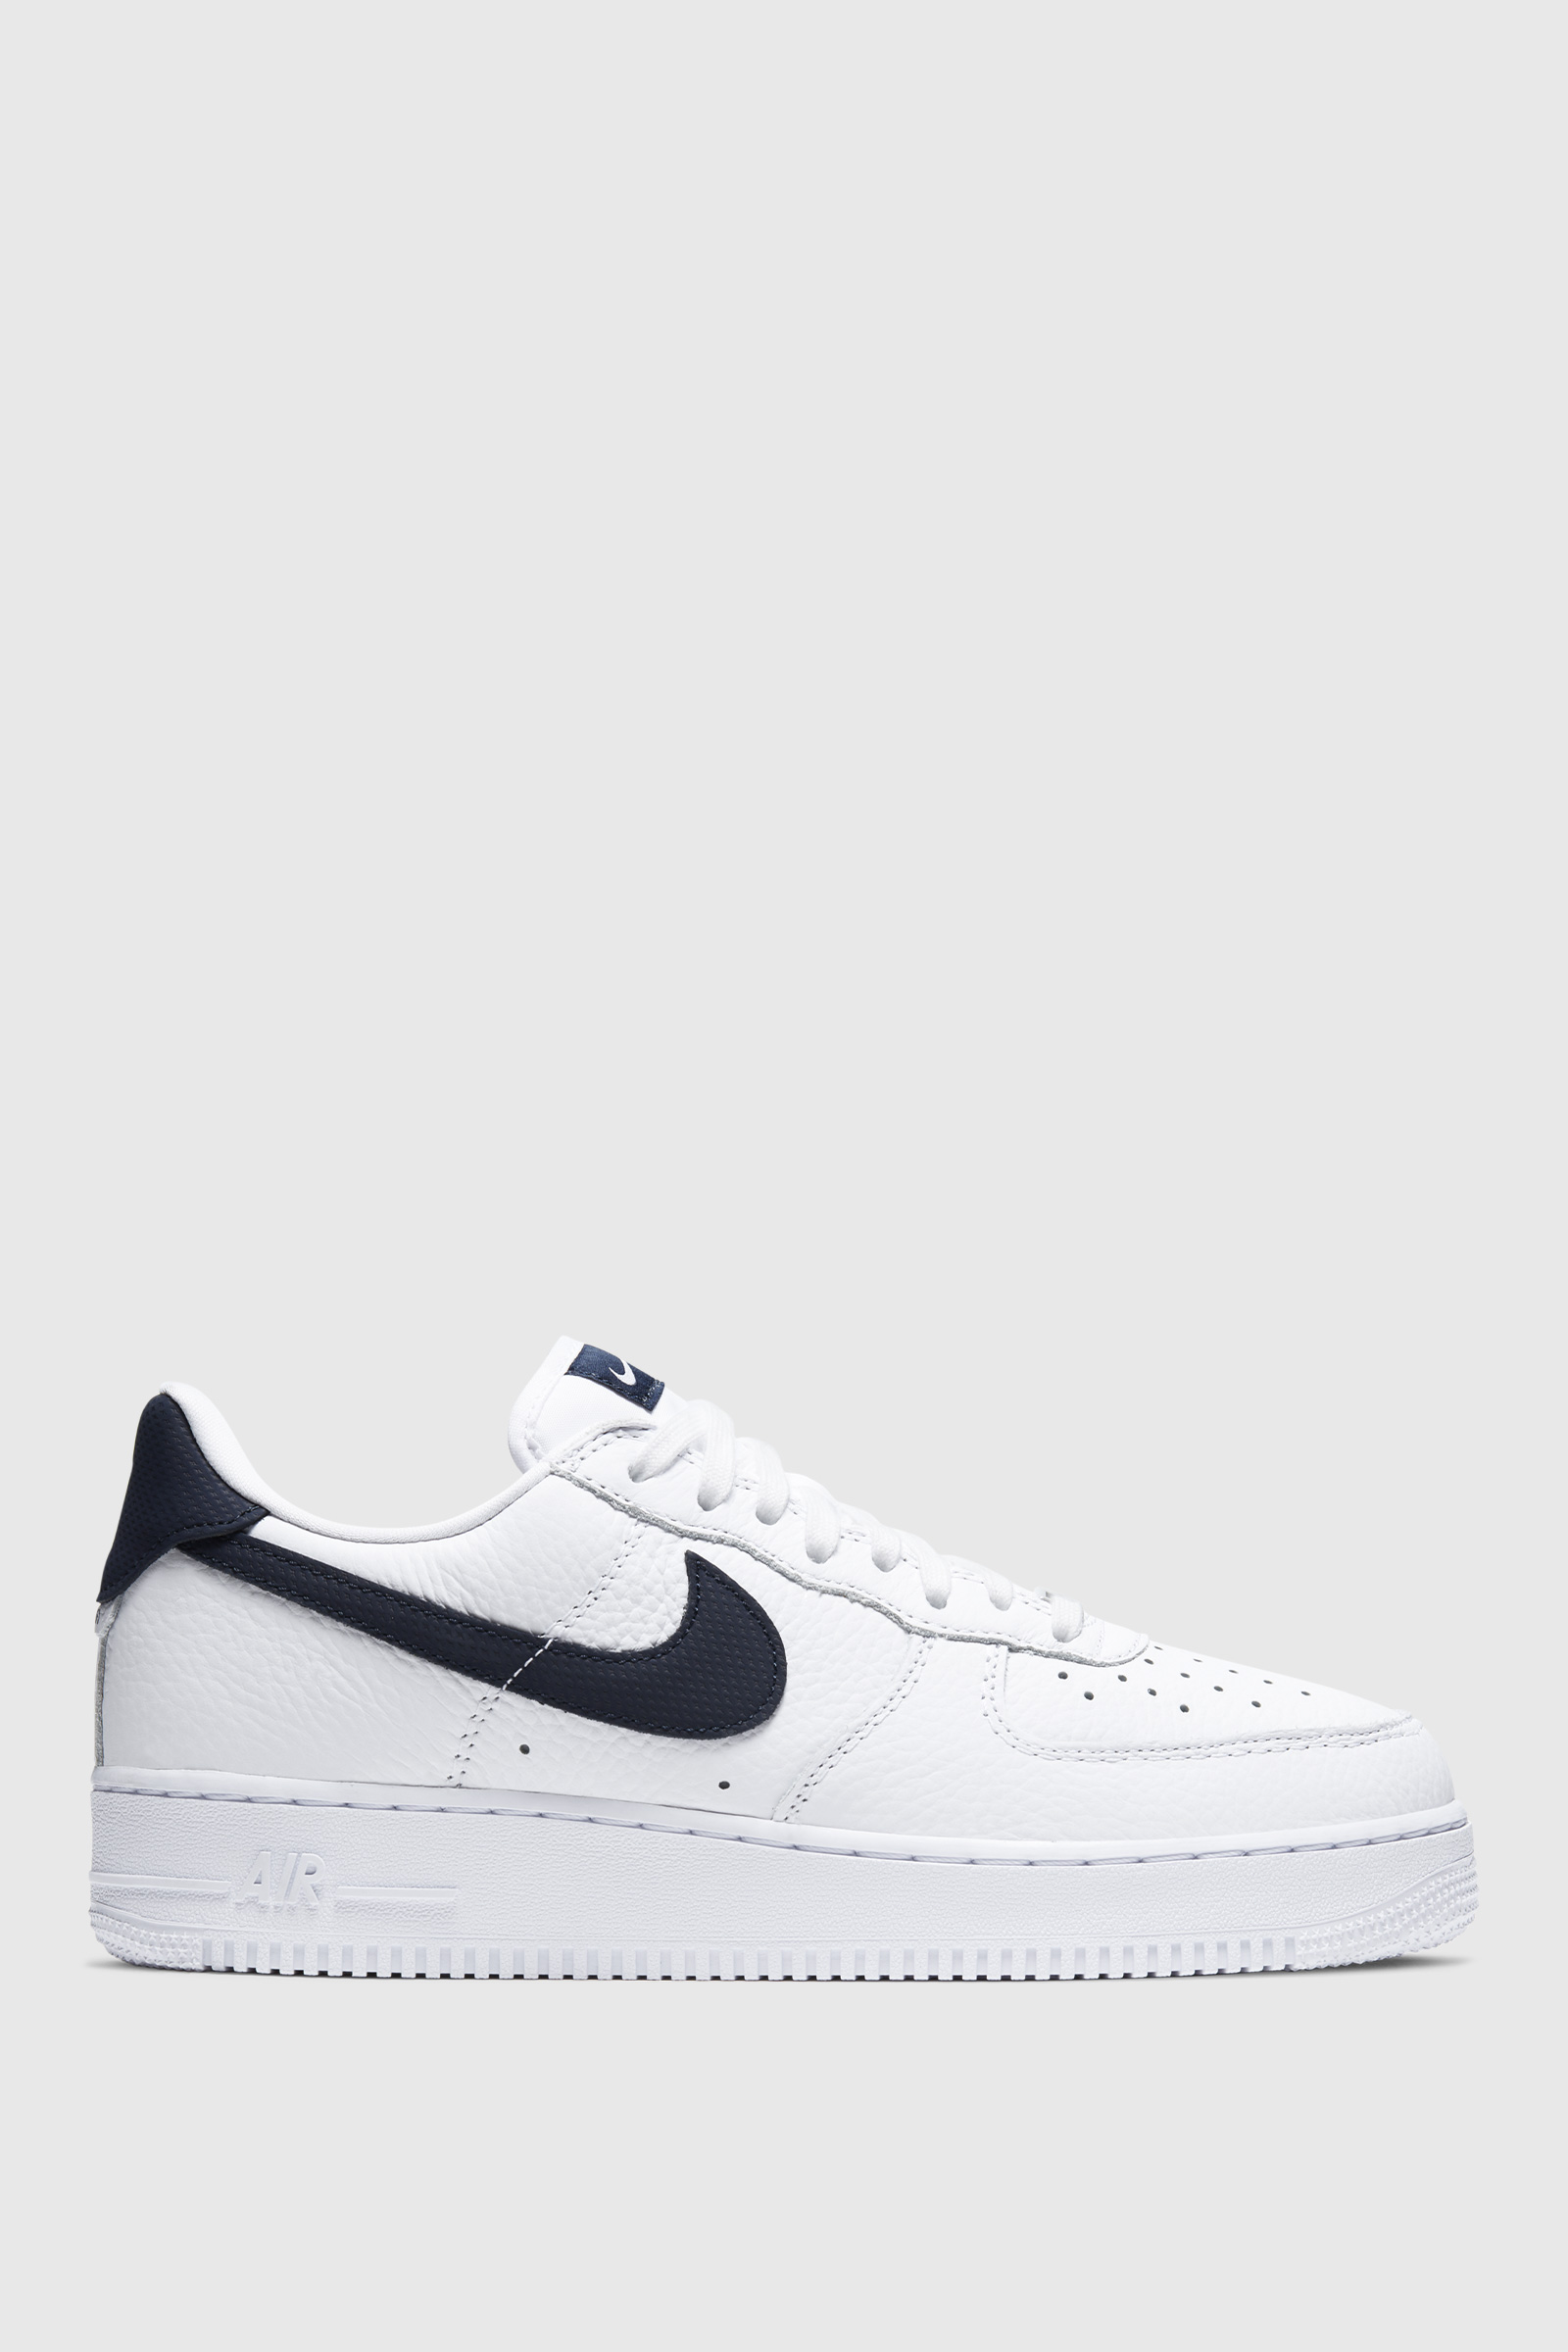 what are air force 1 07